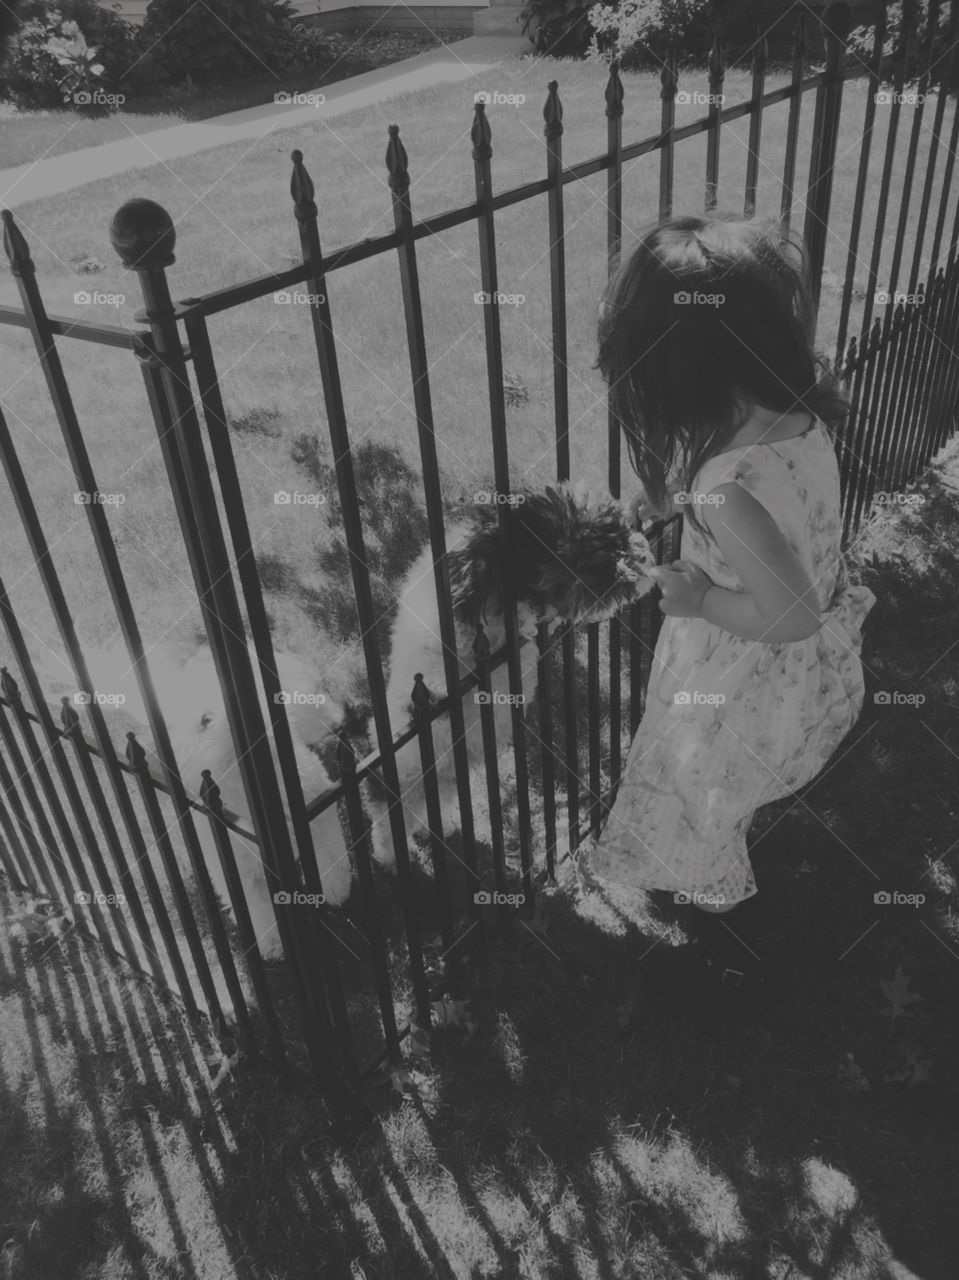 People, One, Monochrome, Adult, Fence